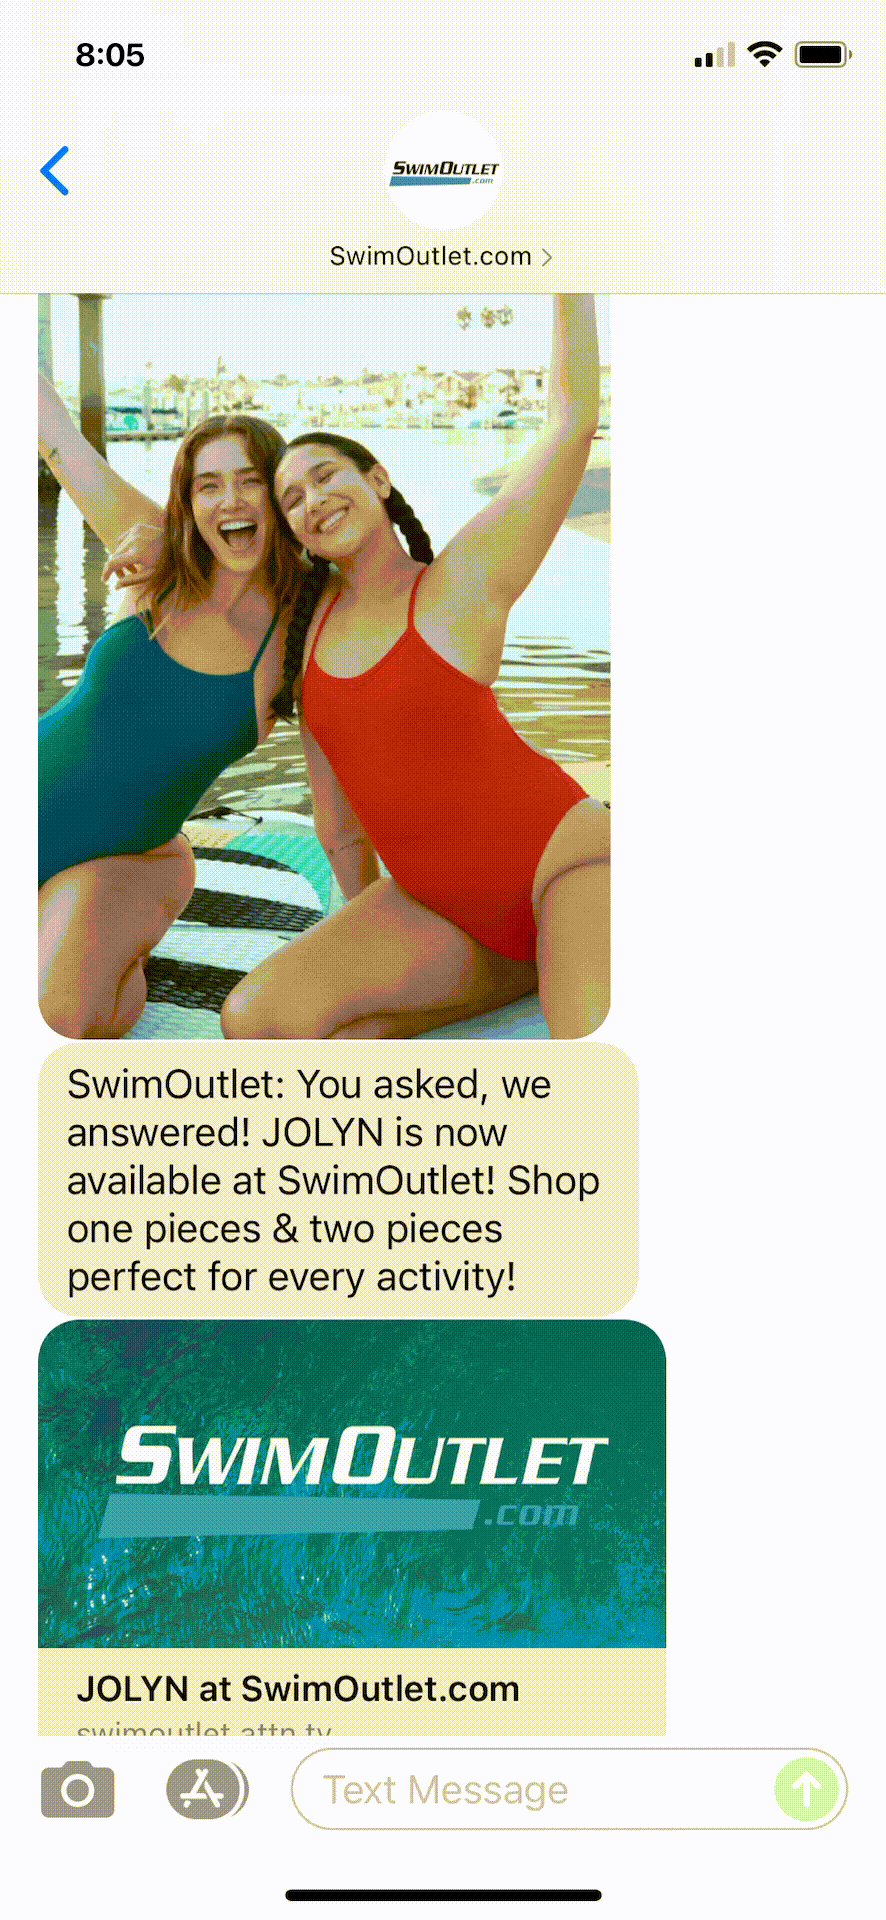 SwimOutlet.com-Text-Message-Marketing-Example-09.09.2021